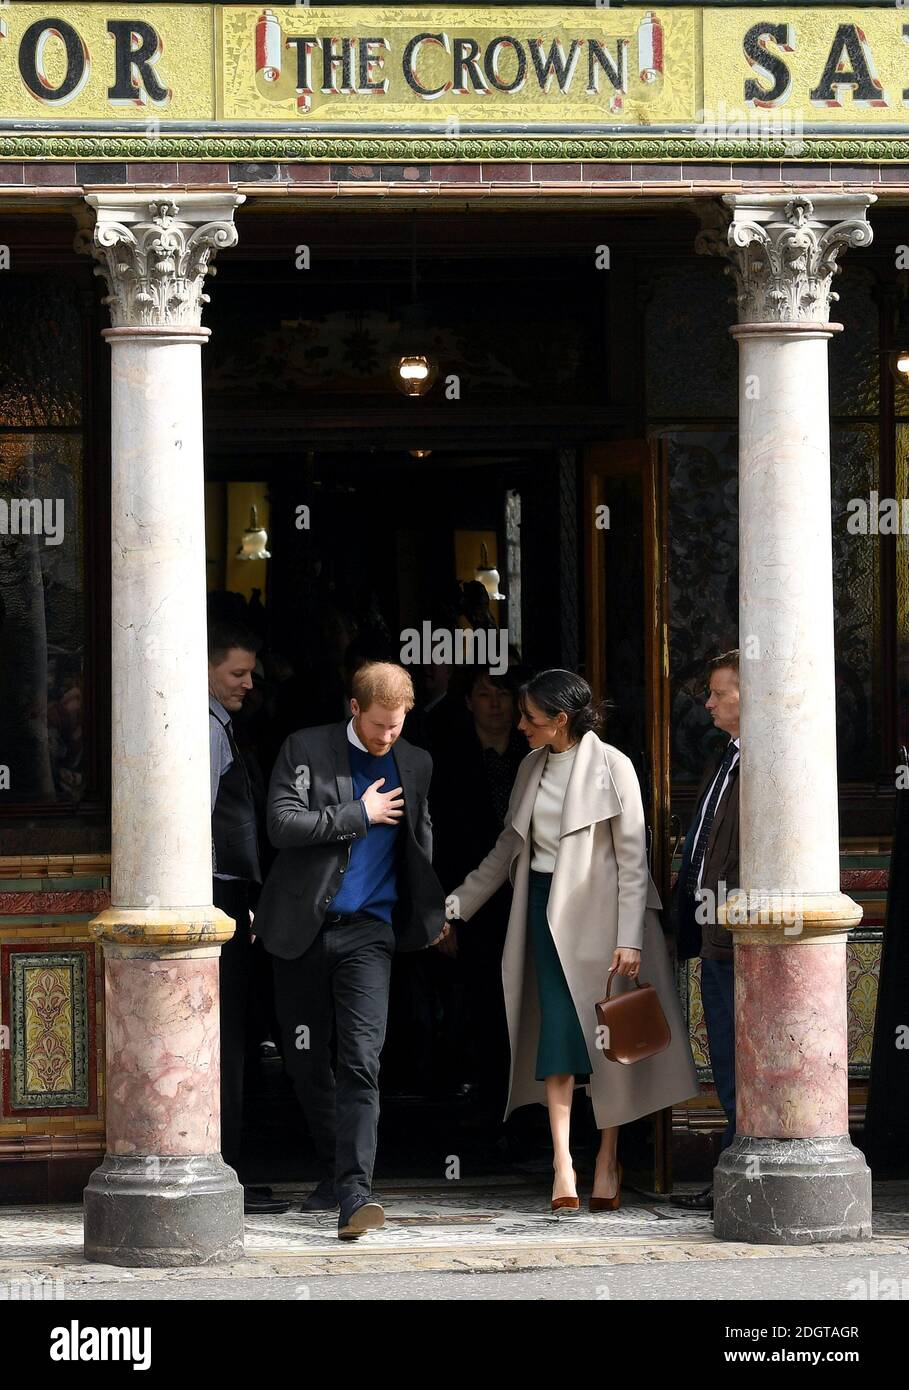 Prince Harry and Meghan Markle leave the Crown Liquor Saloon Bar after visiting before a walkabout in the city centre Stock Photo